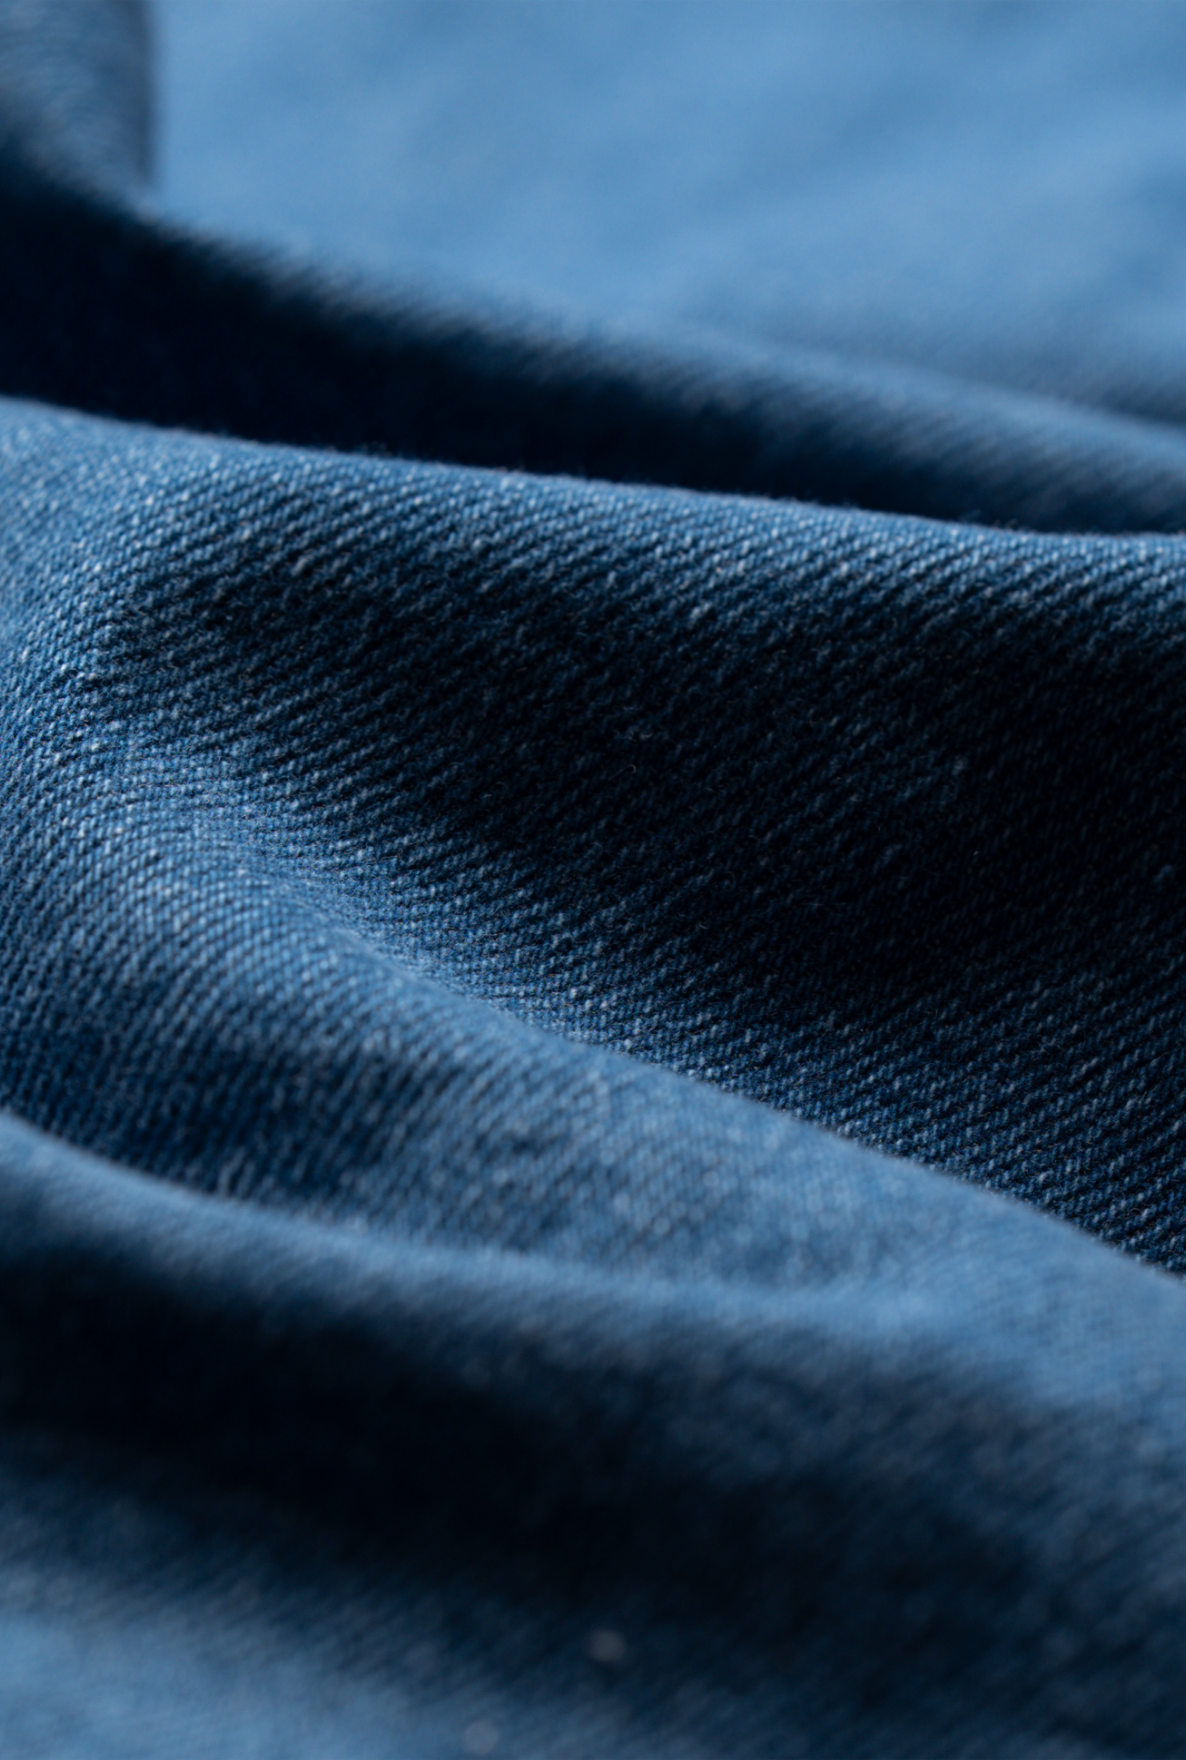 Close up material detail showing dark blue jeans